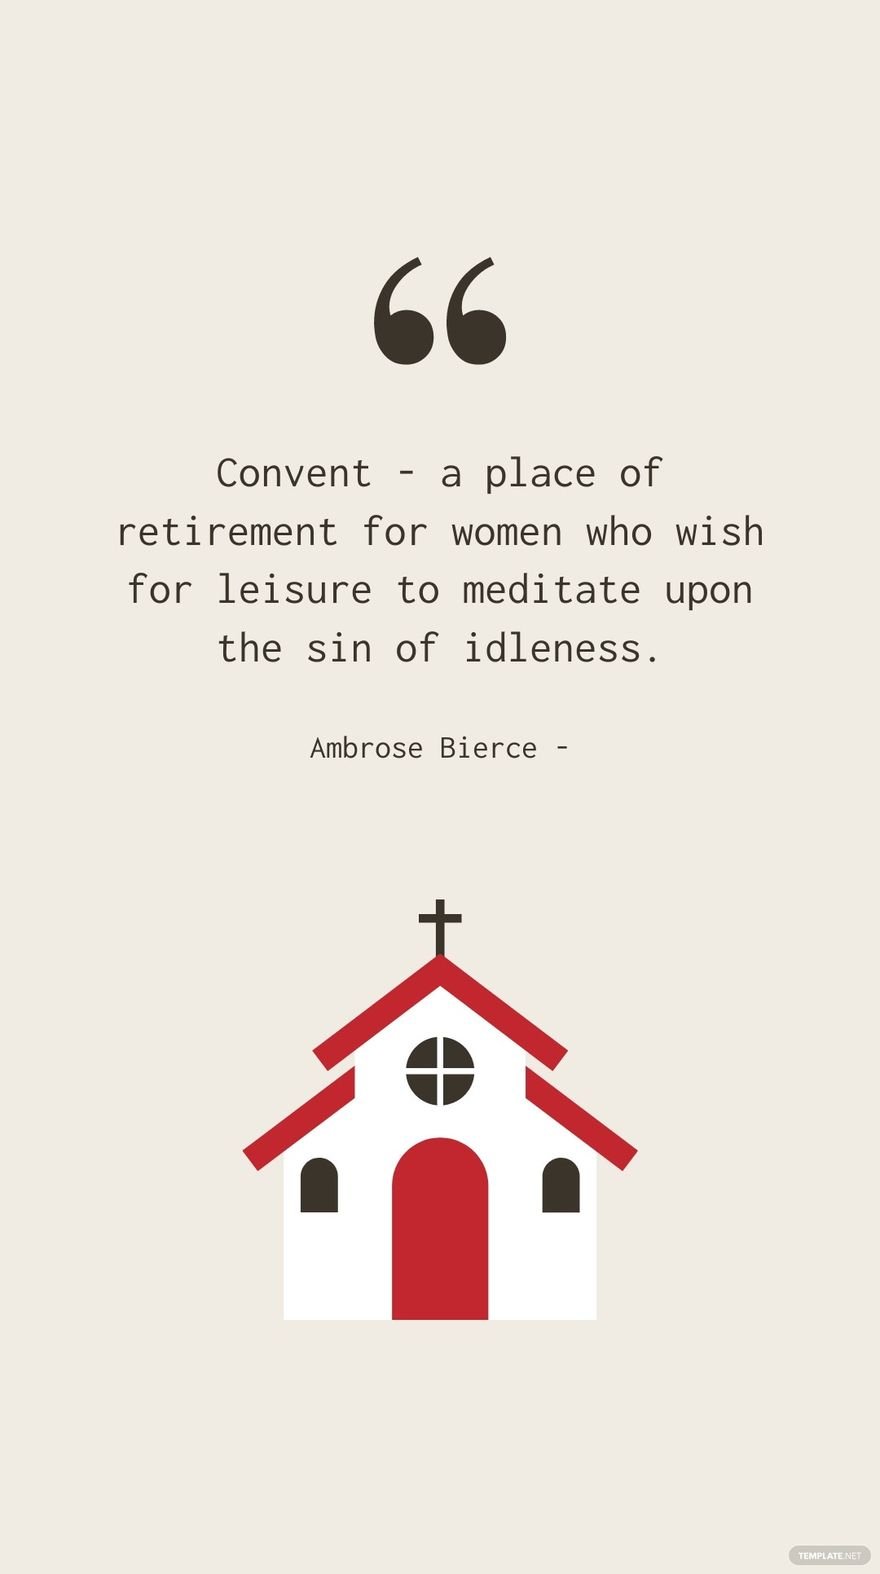 Free Ambrose Bierce - Convent - a place of retirement for women who wish for leisure to meditate upon the sin of idleness.